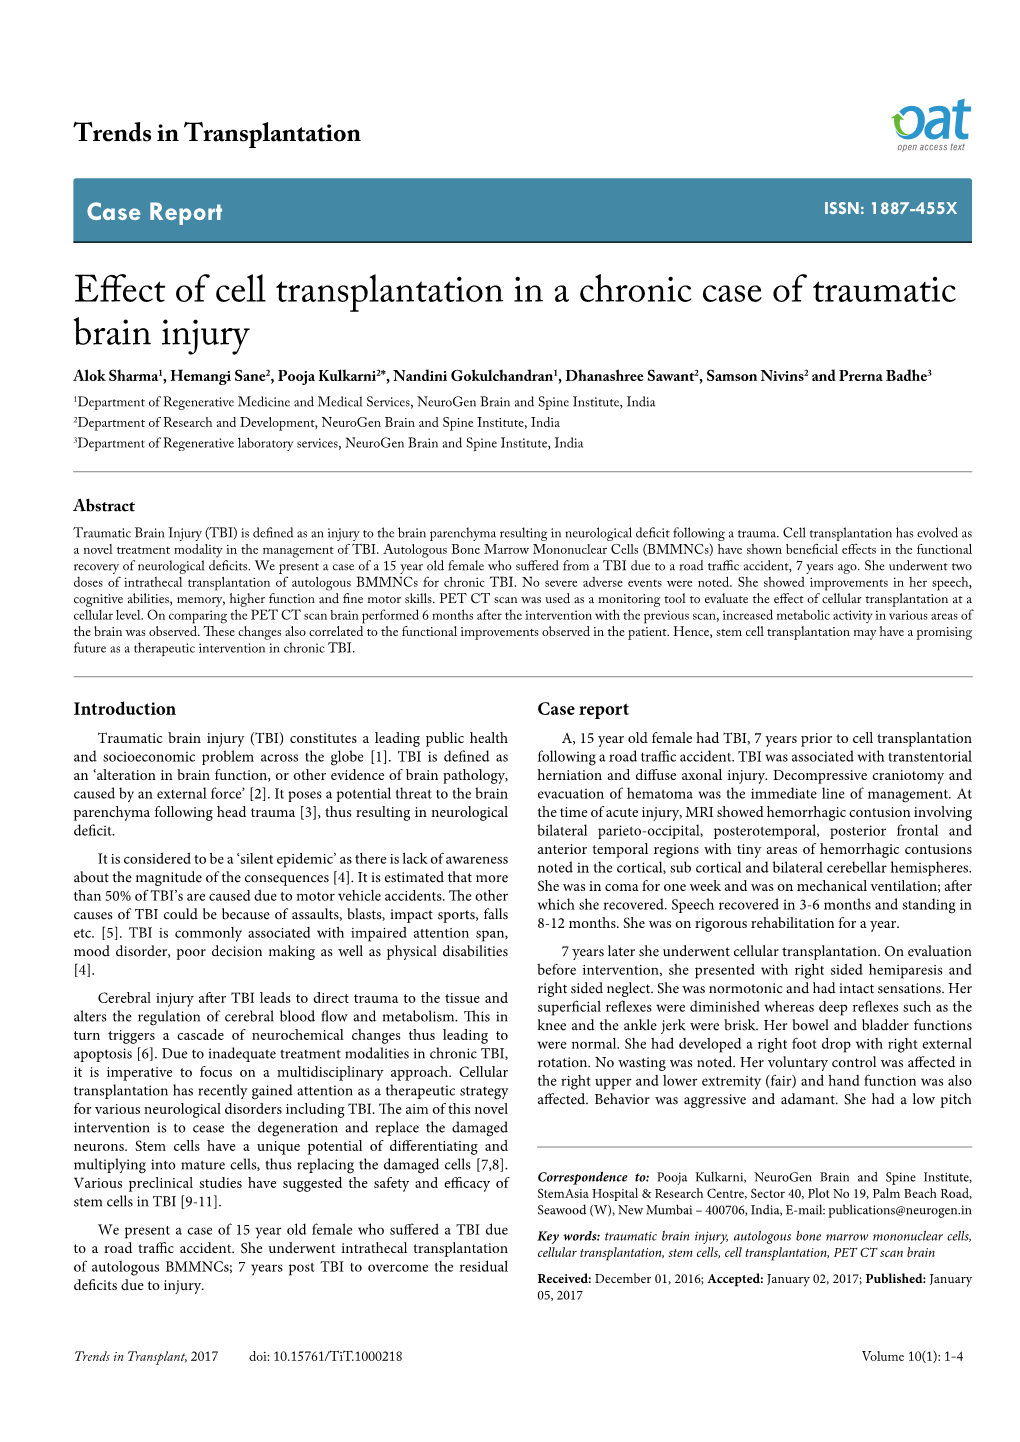 Effect of Cell Transplantation in a Chronic Case of Traumatic Brain Injury